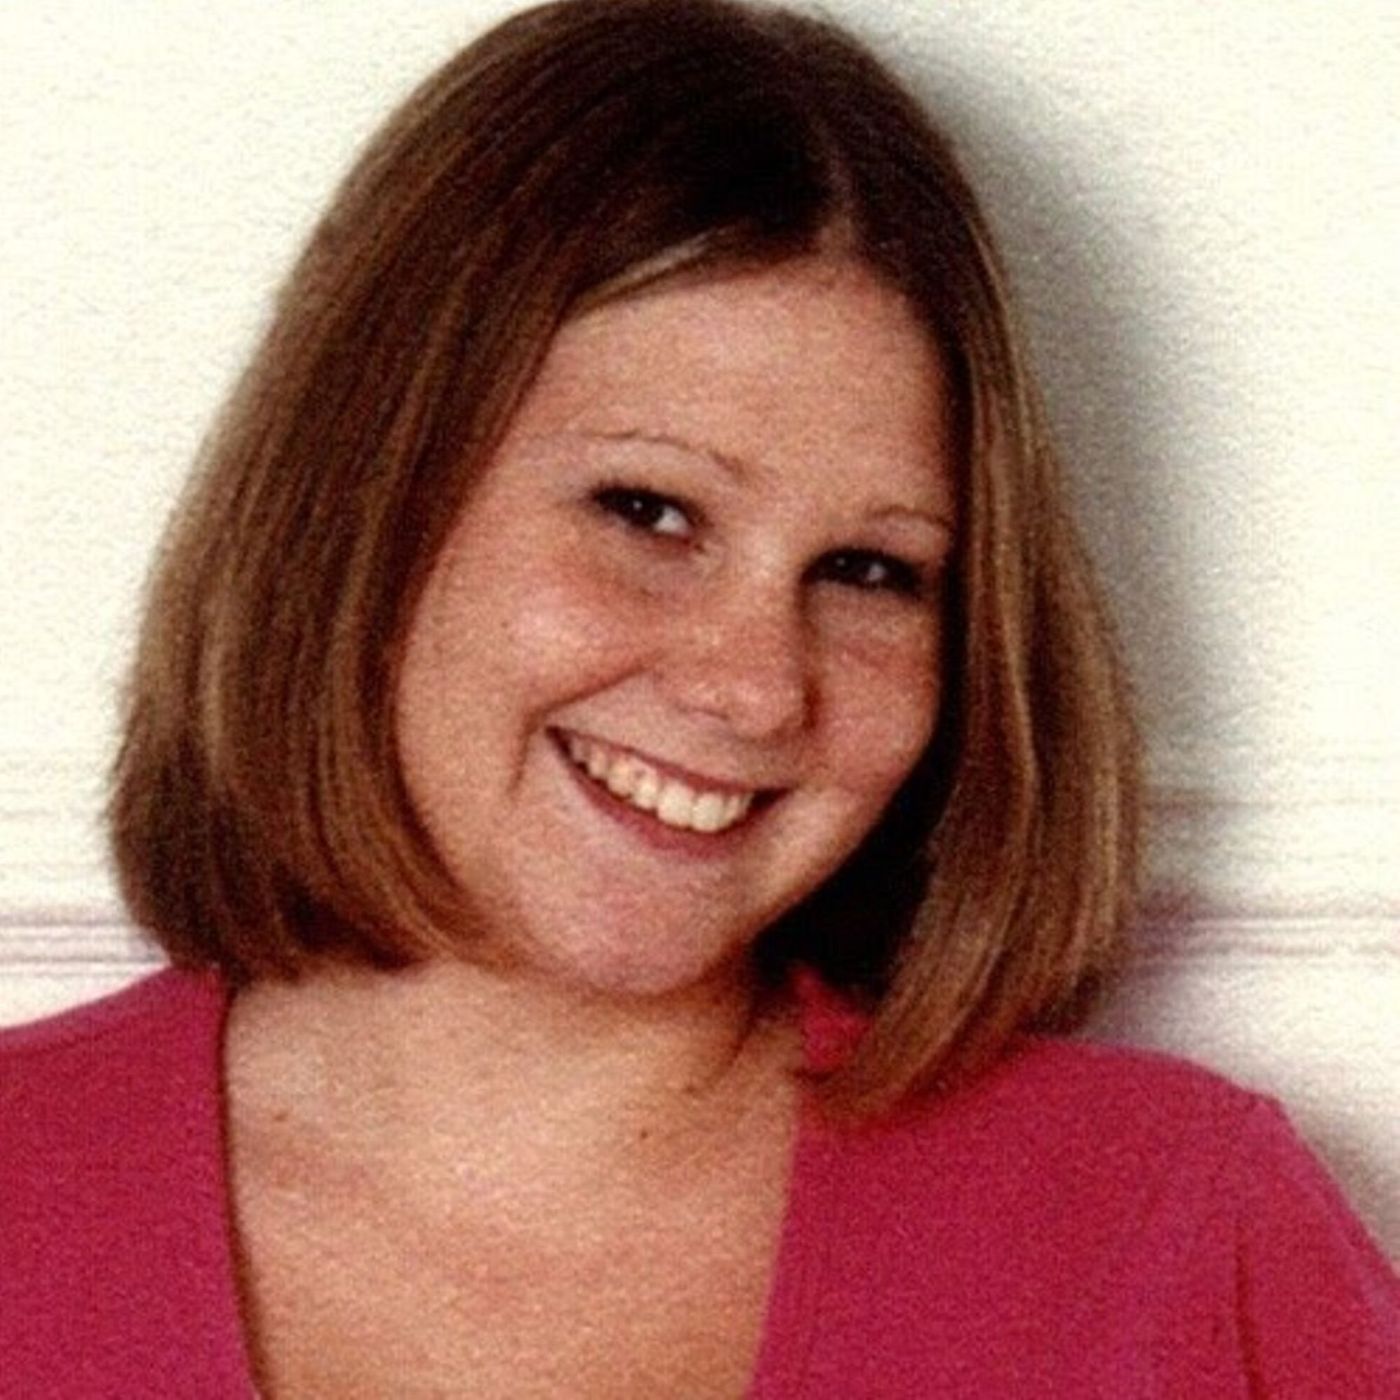 The Disappearance of Jessica O'Grady